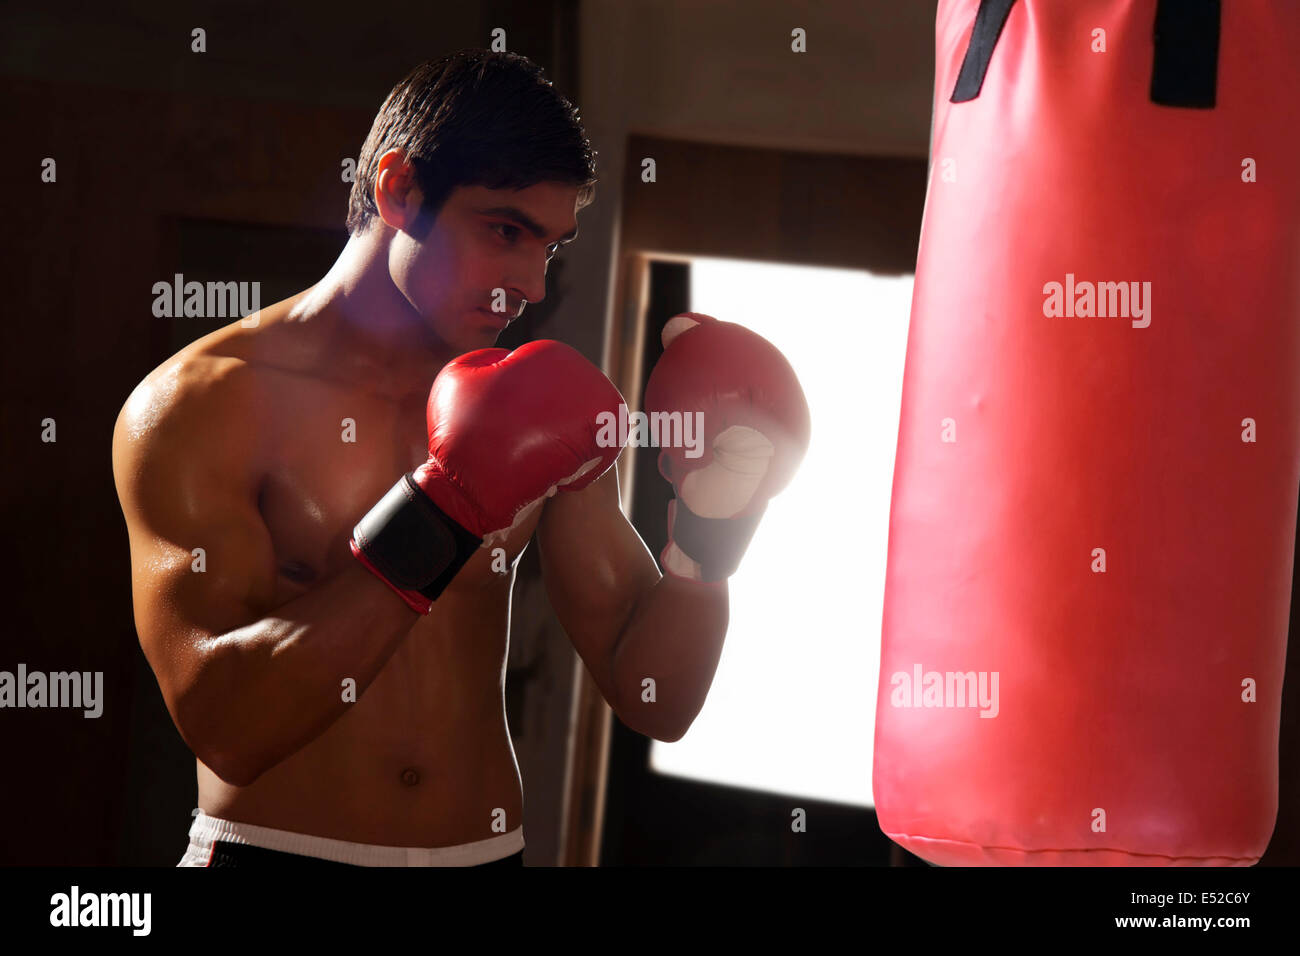 Young shirtless man working out with punching bag in gym Stock Photo